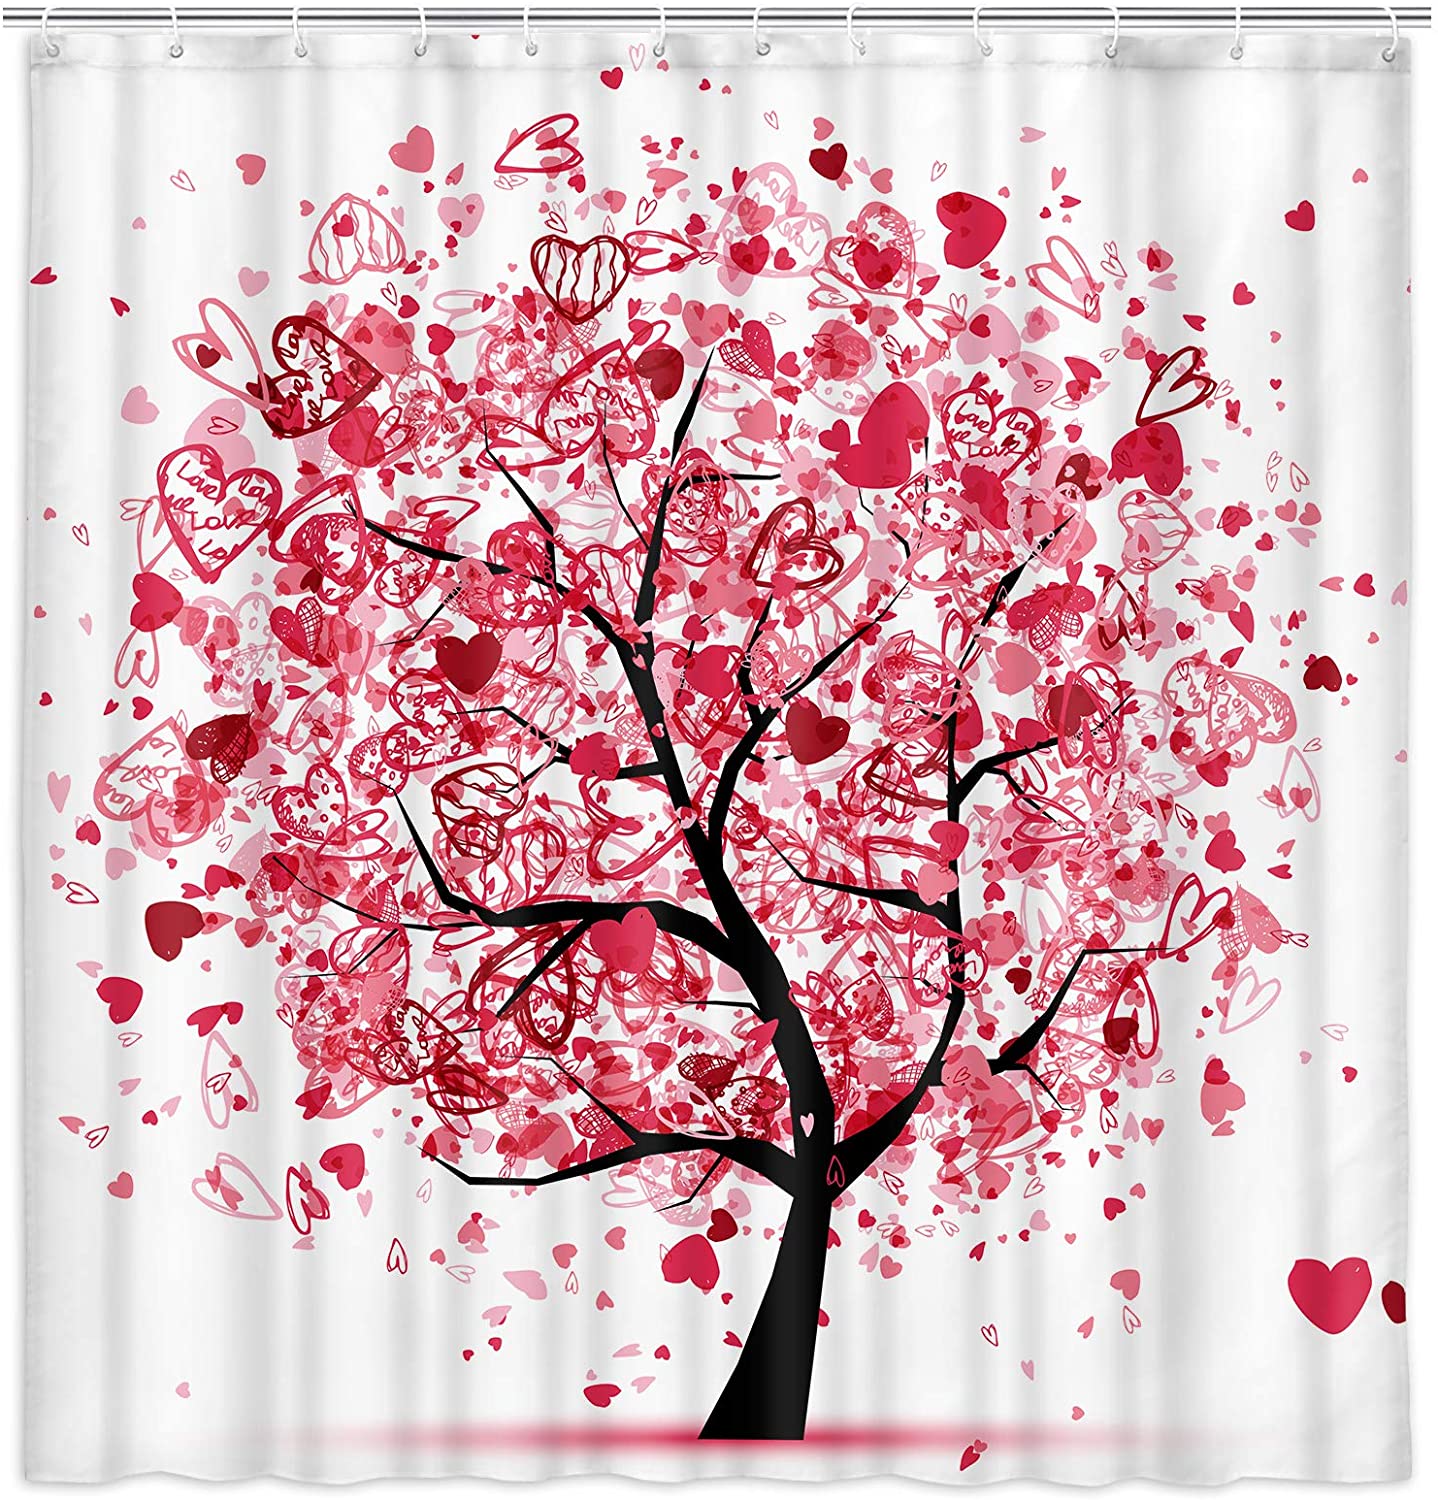 Short Lead Time for Polyester Shower Curtain - Tree of Life Shower Curtain for Bathroom Valentines Tree with Pink Hearts Doodles Decorated Shower Curtain Fabric Bathroom Curtain – DAIRUI